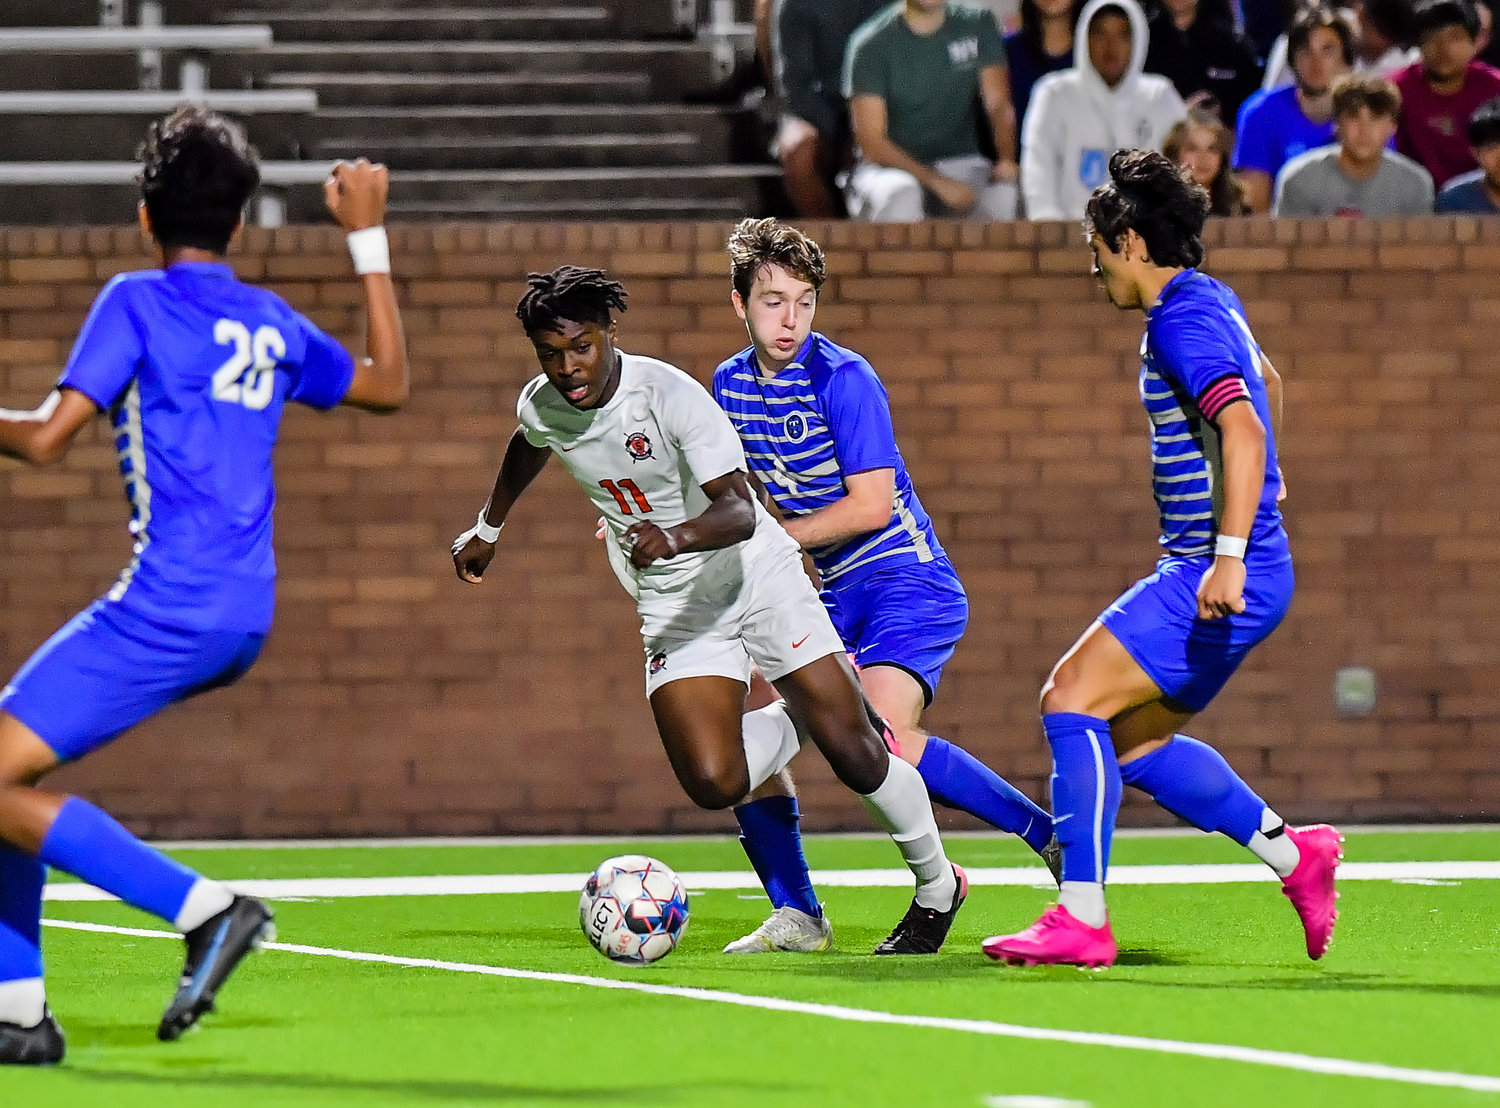 April 1, 2022: Seven Lakes Daniel Ejerenwa #11 goes for the ball during Regional Quarterfinal soccer playoff, Seven Lakes vs Katy Taylor at Rhode Stadium. (Photo by Mark Goodman / Katy Times)